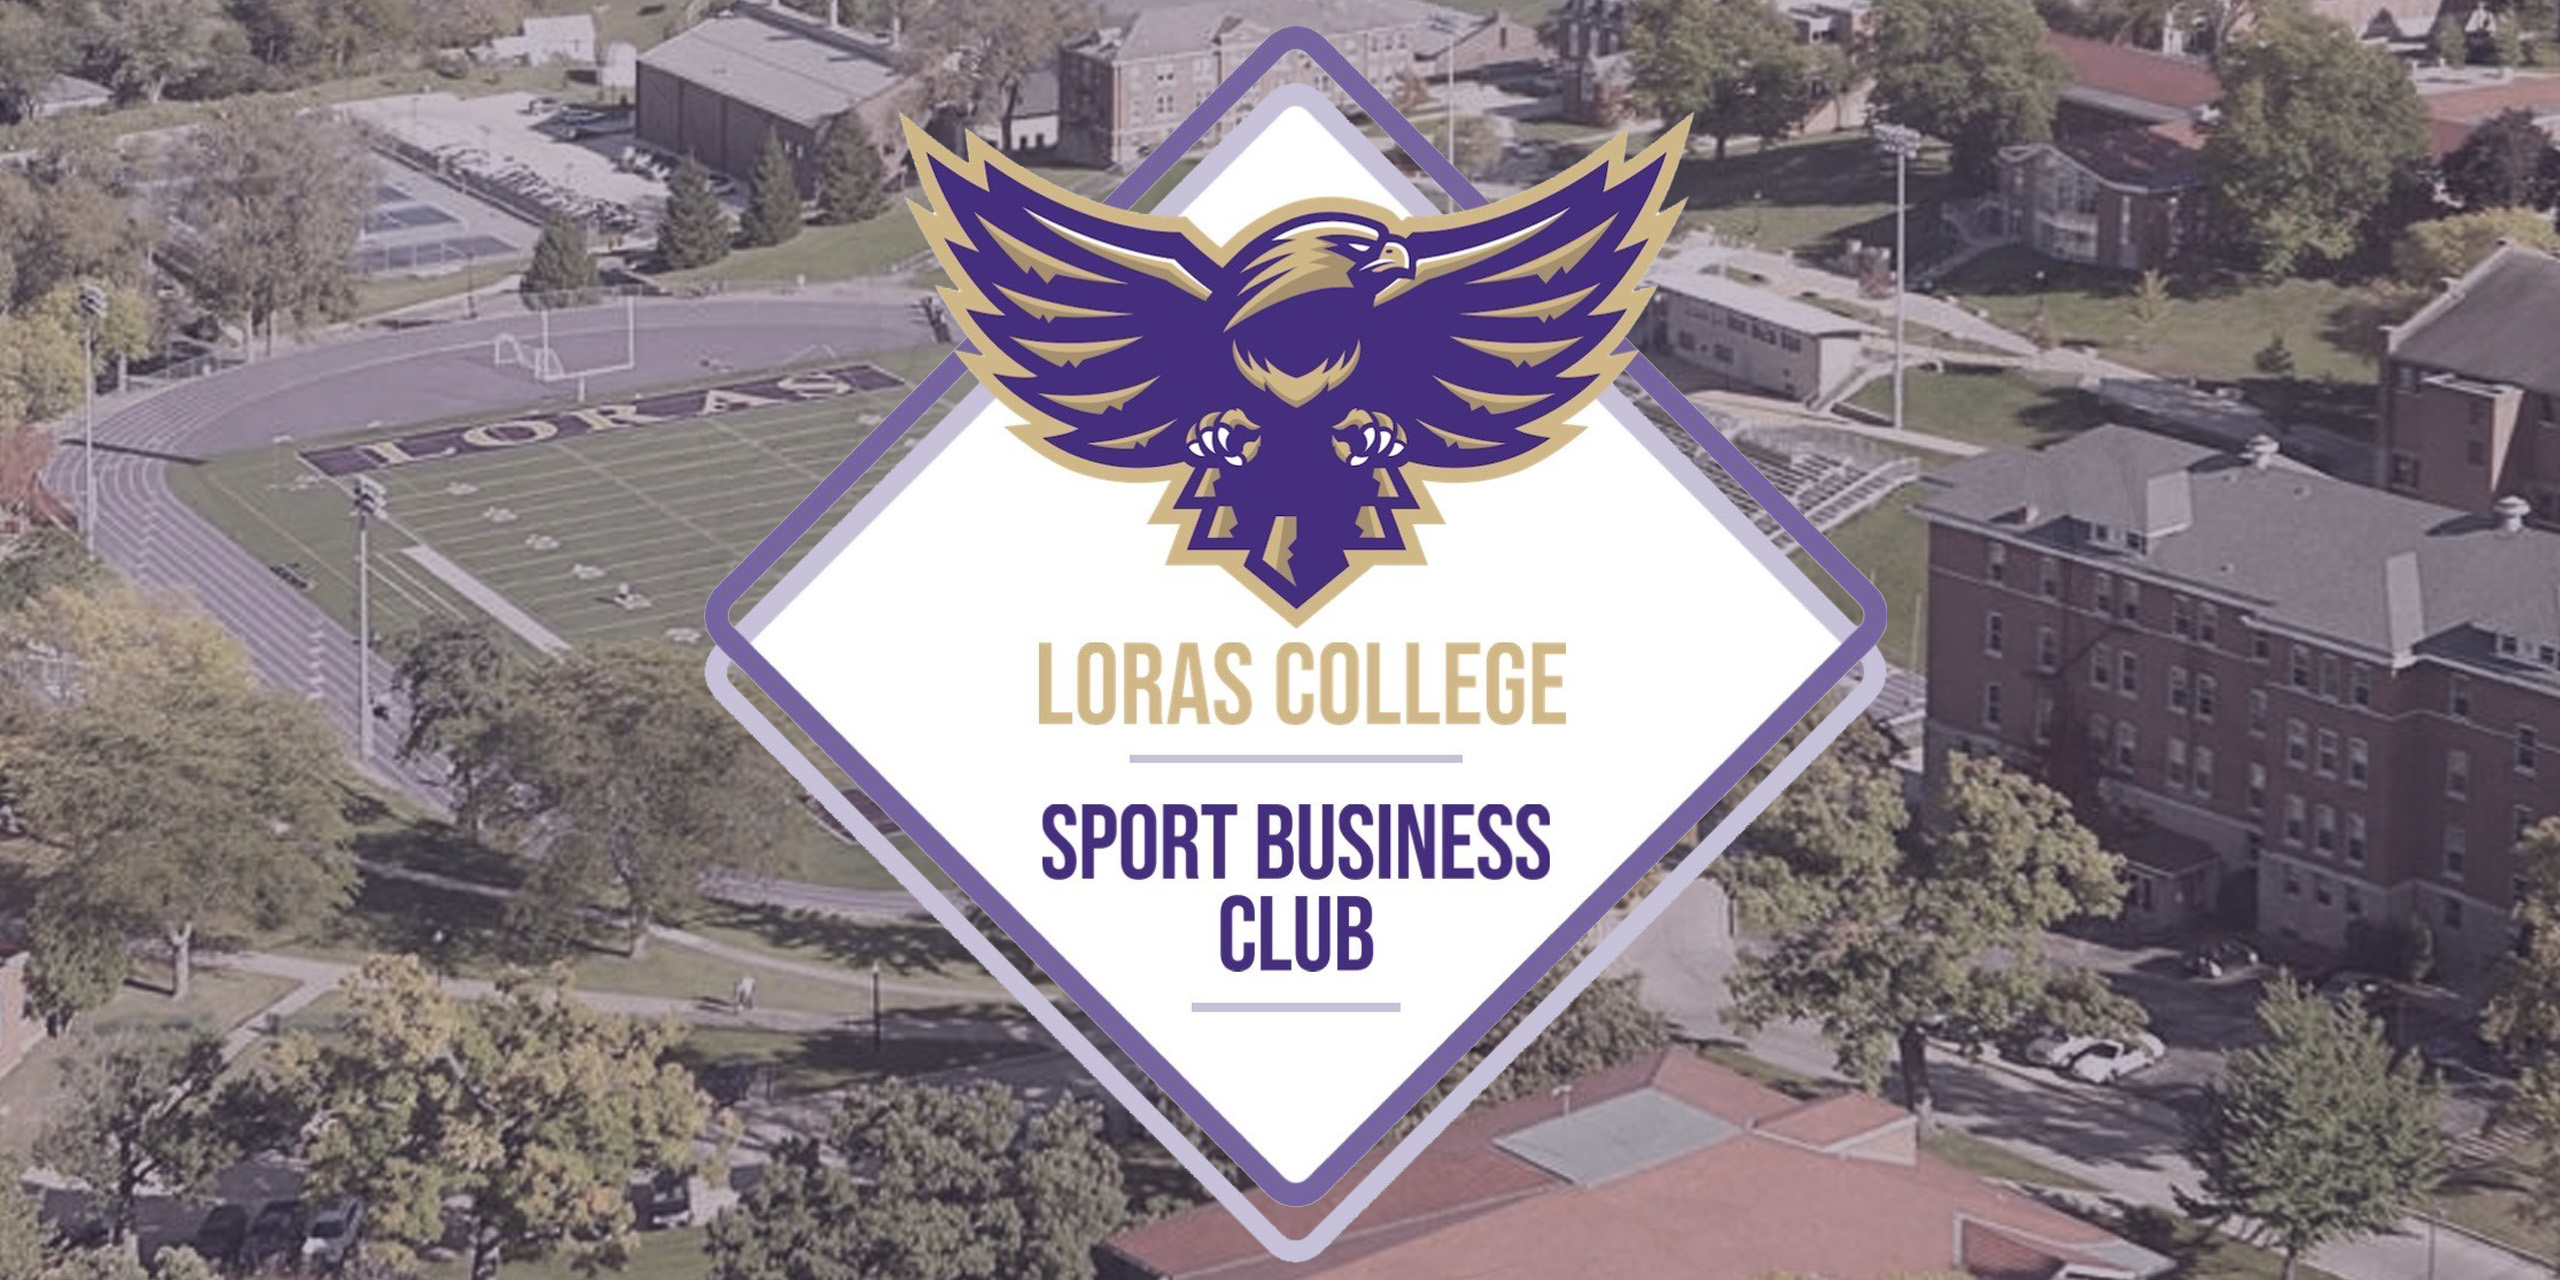 Sport Business Club graphic.